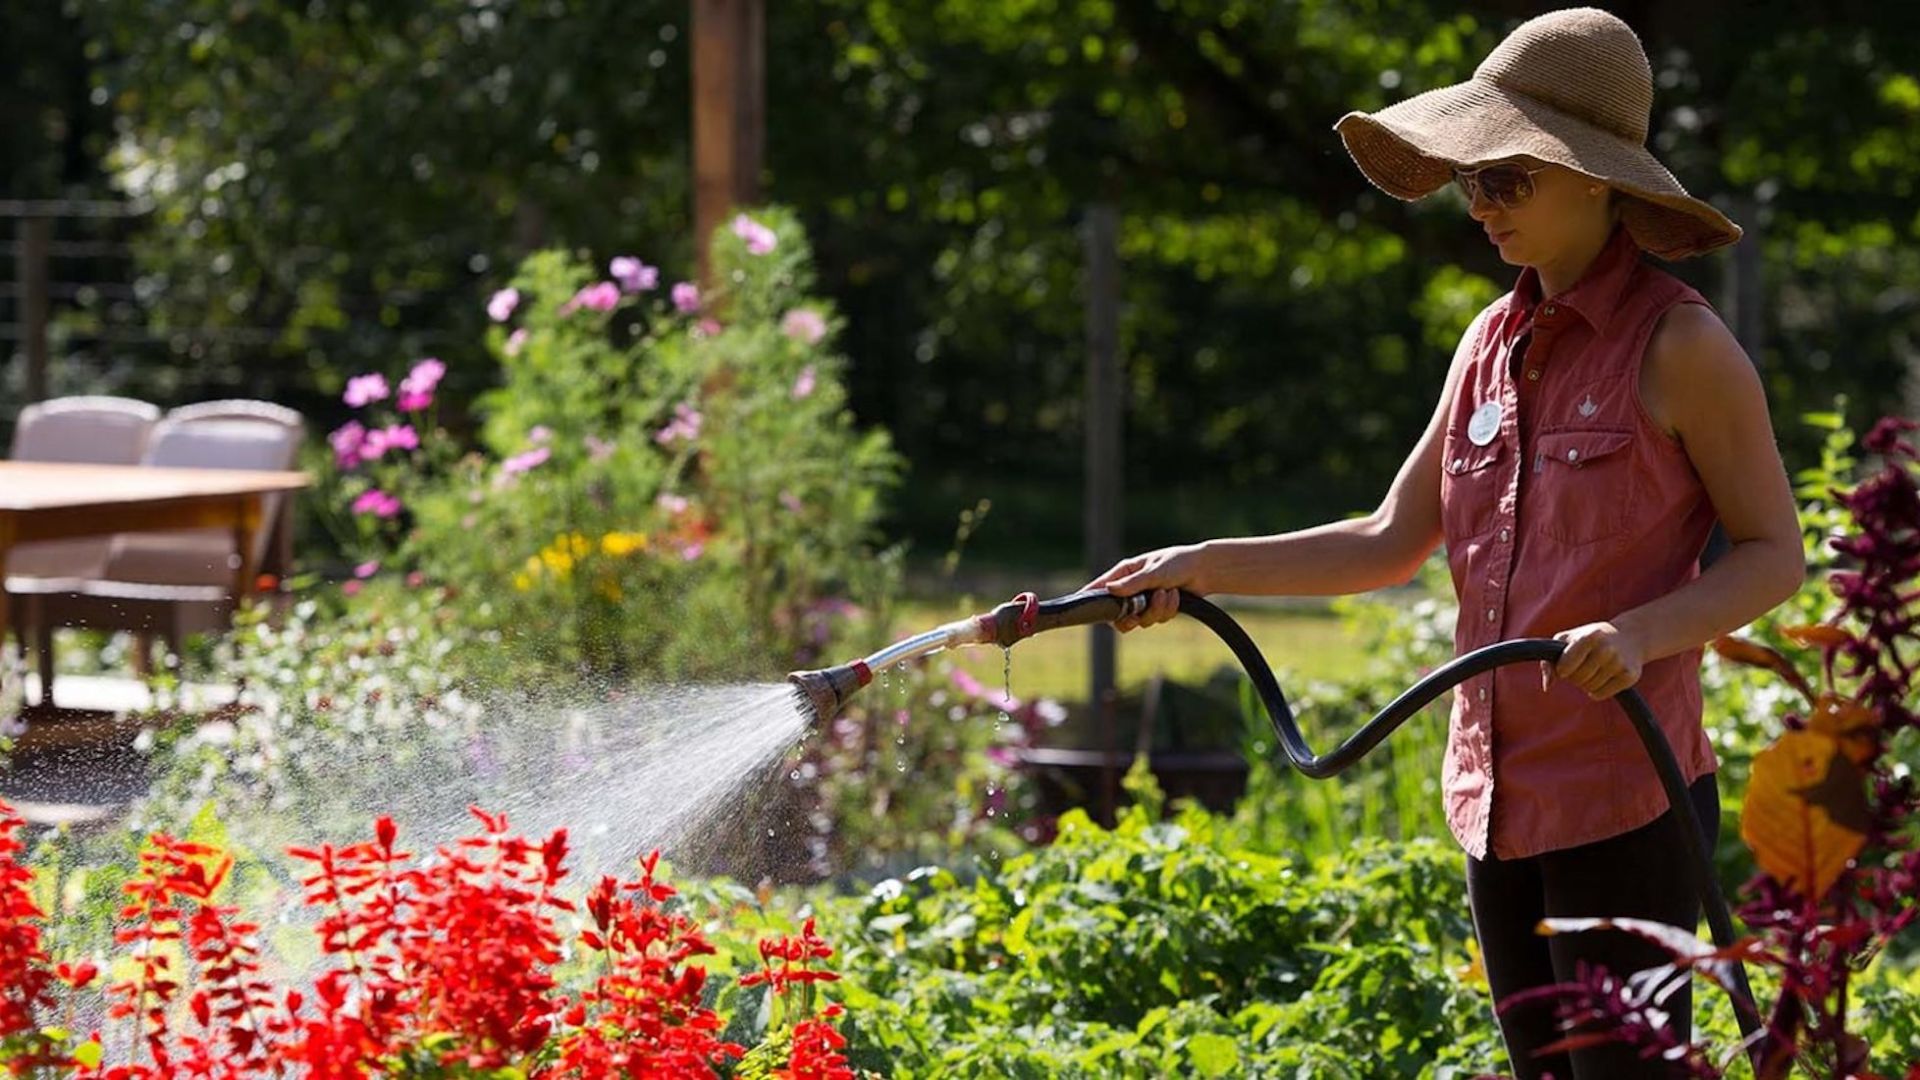 A woman watering flowers and plants in a garden at The Lodge at Woodloch